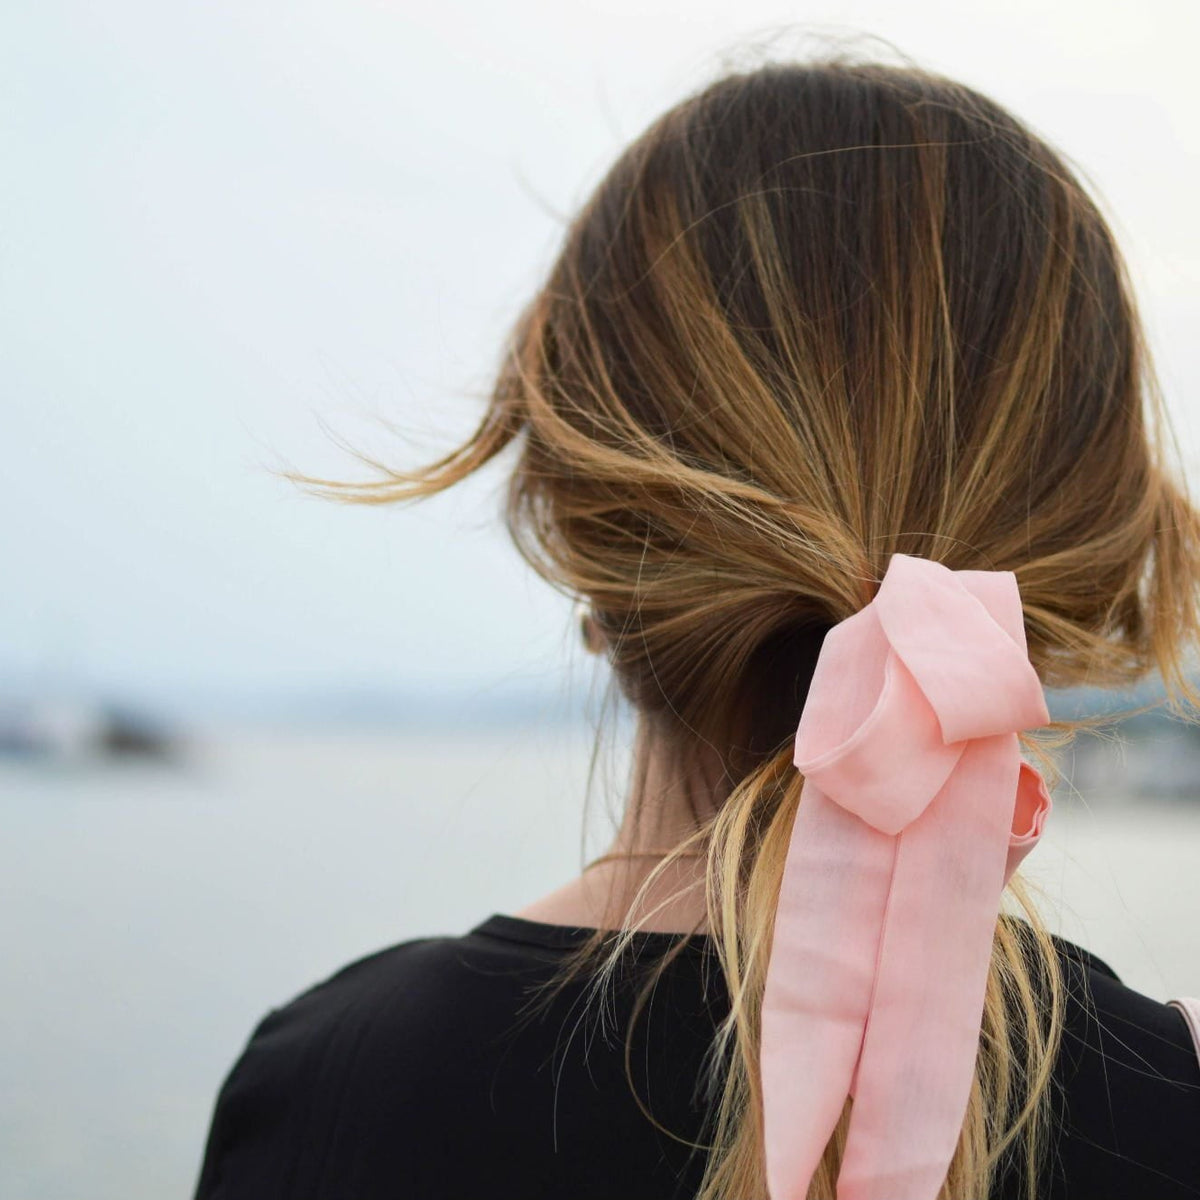 The Ribbons in Hair Trend Is Already All Over Fashion Week